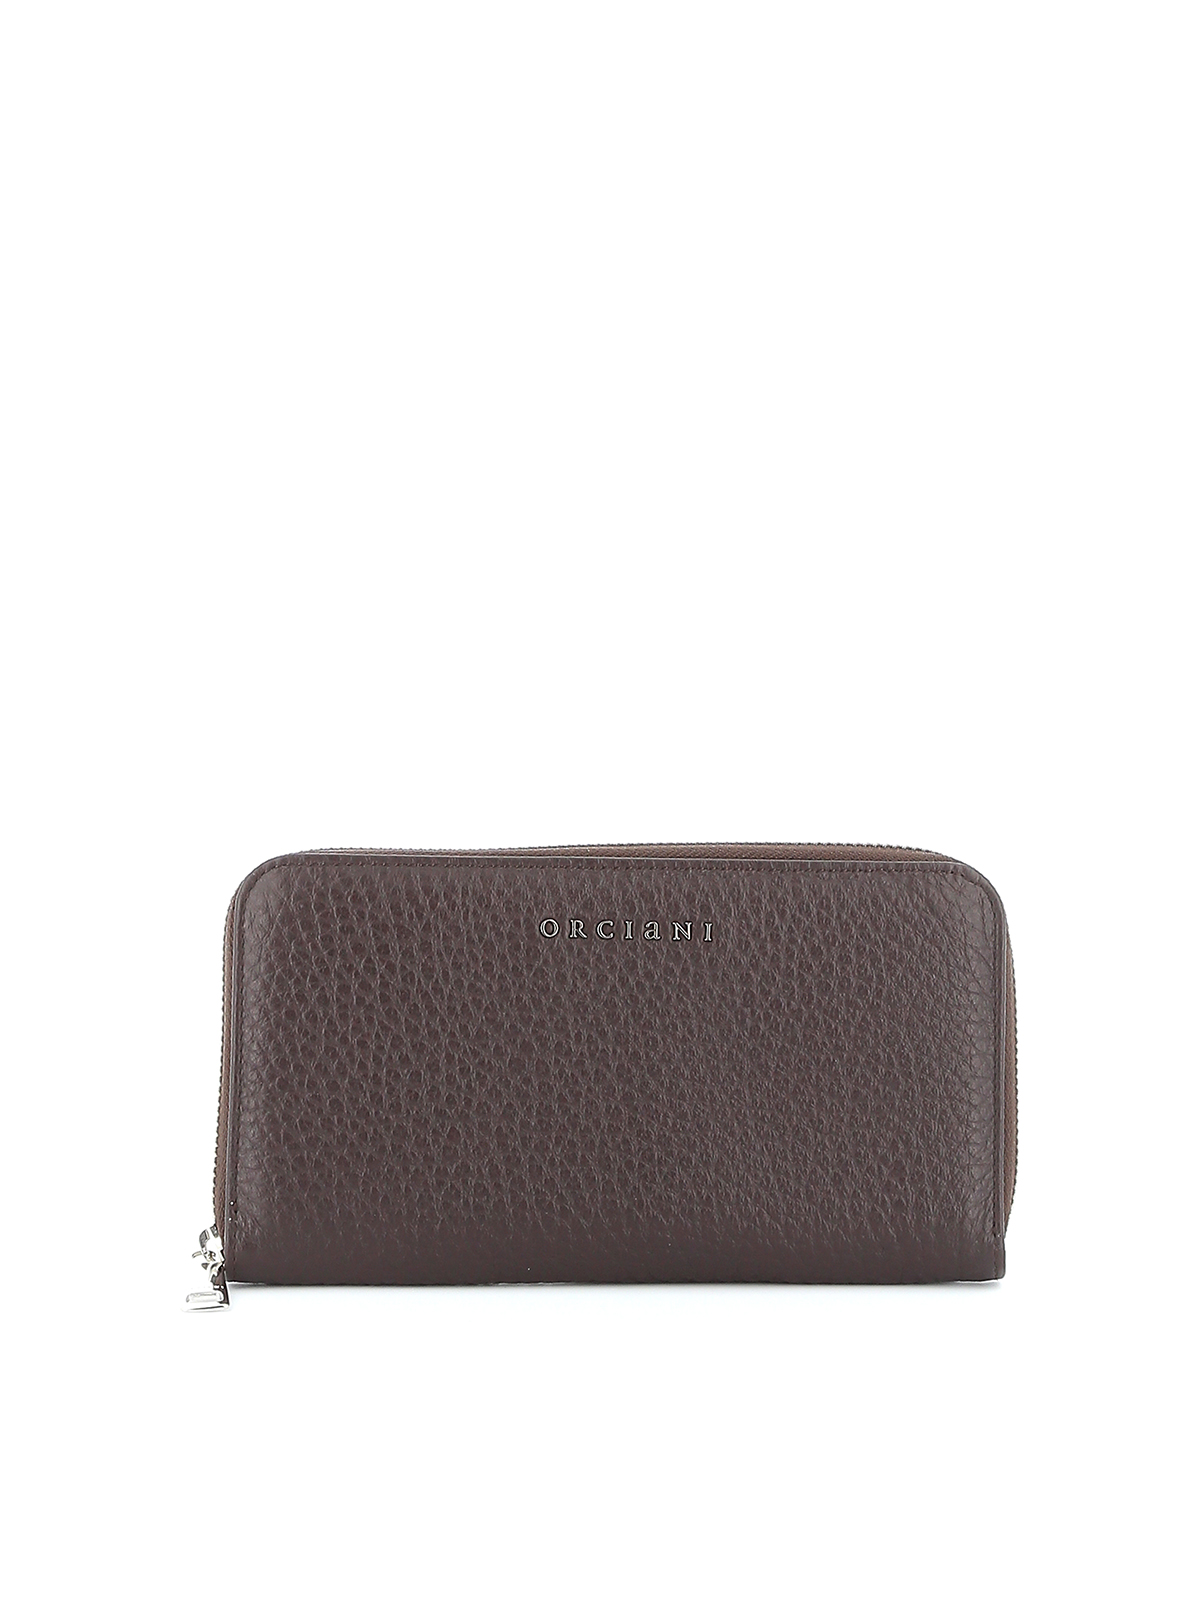 Orciani Pebbled Leather Zip Around Wallet In Brown